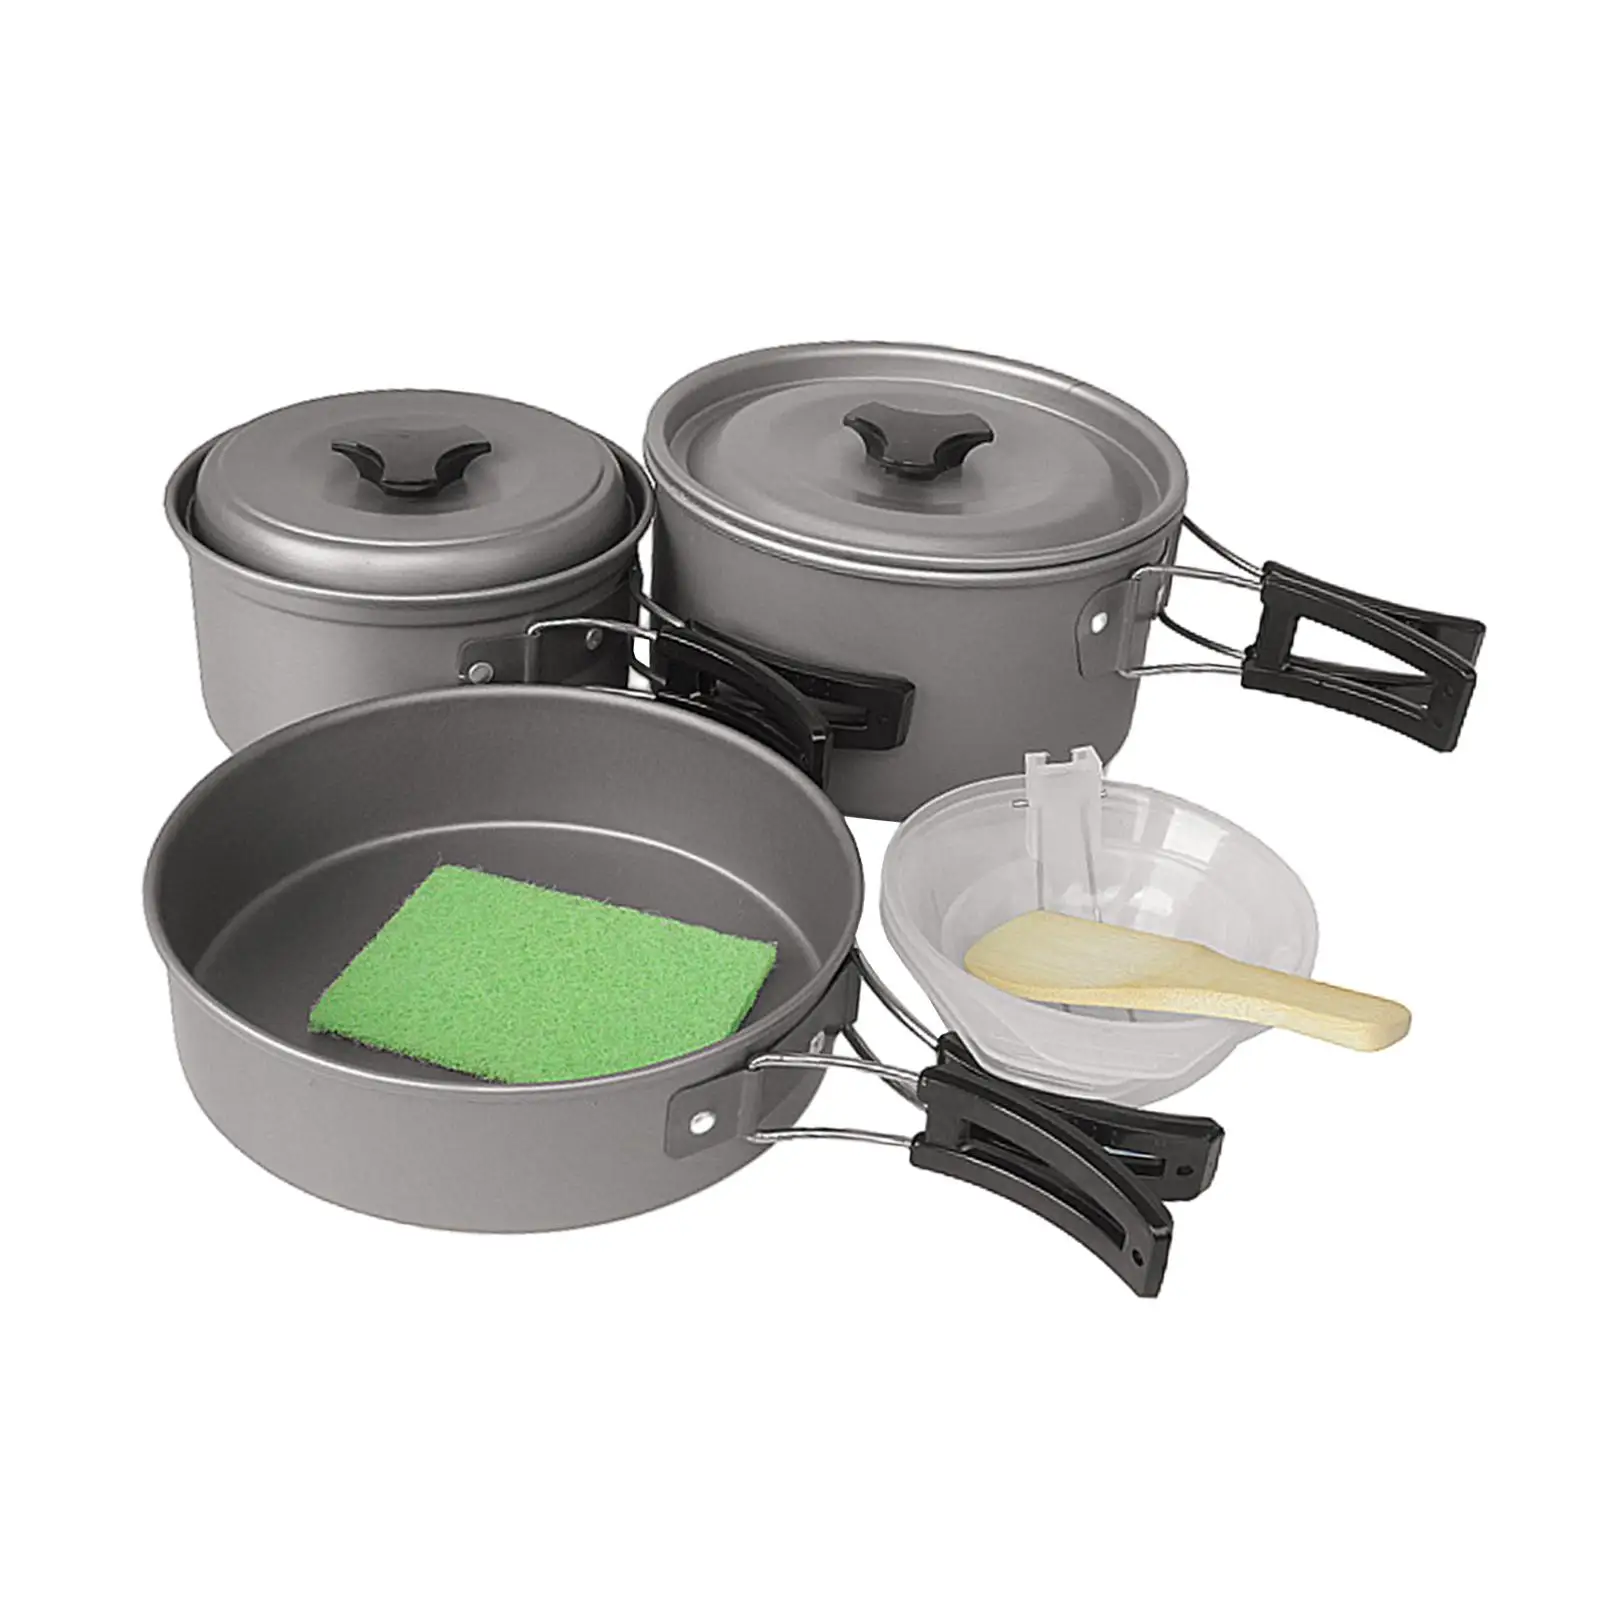 Camping Cookware Set for Campfire Compact with Bowls with Folding Handles Frying